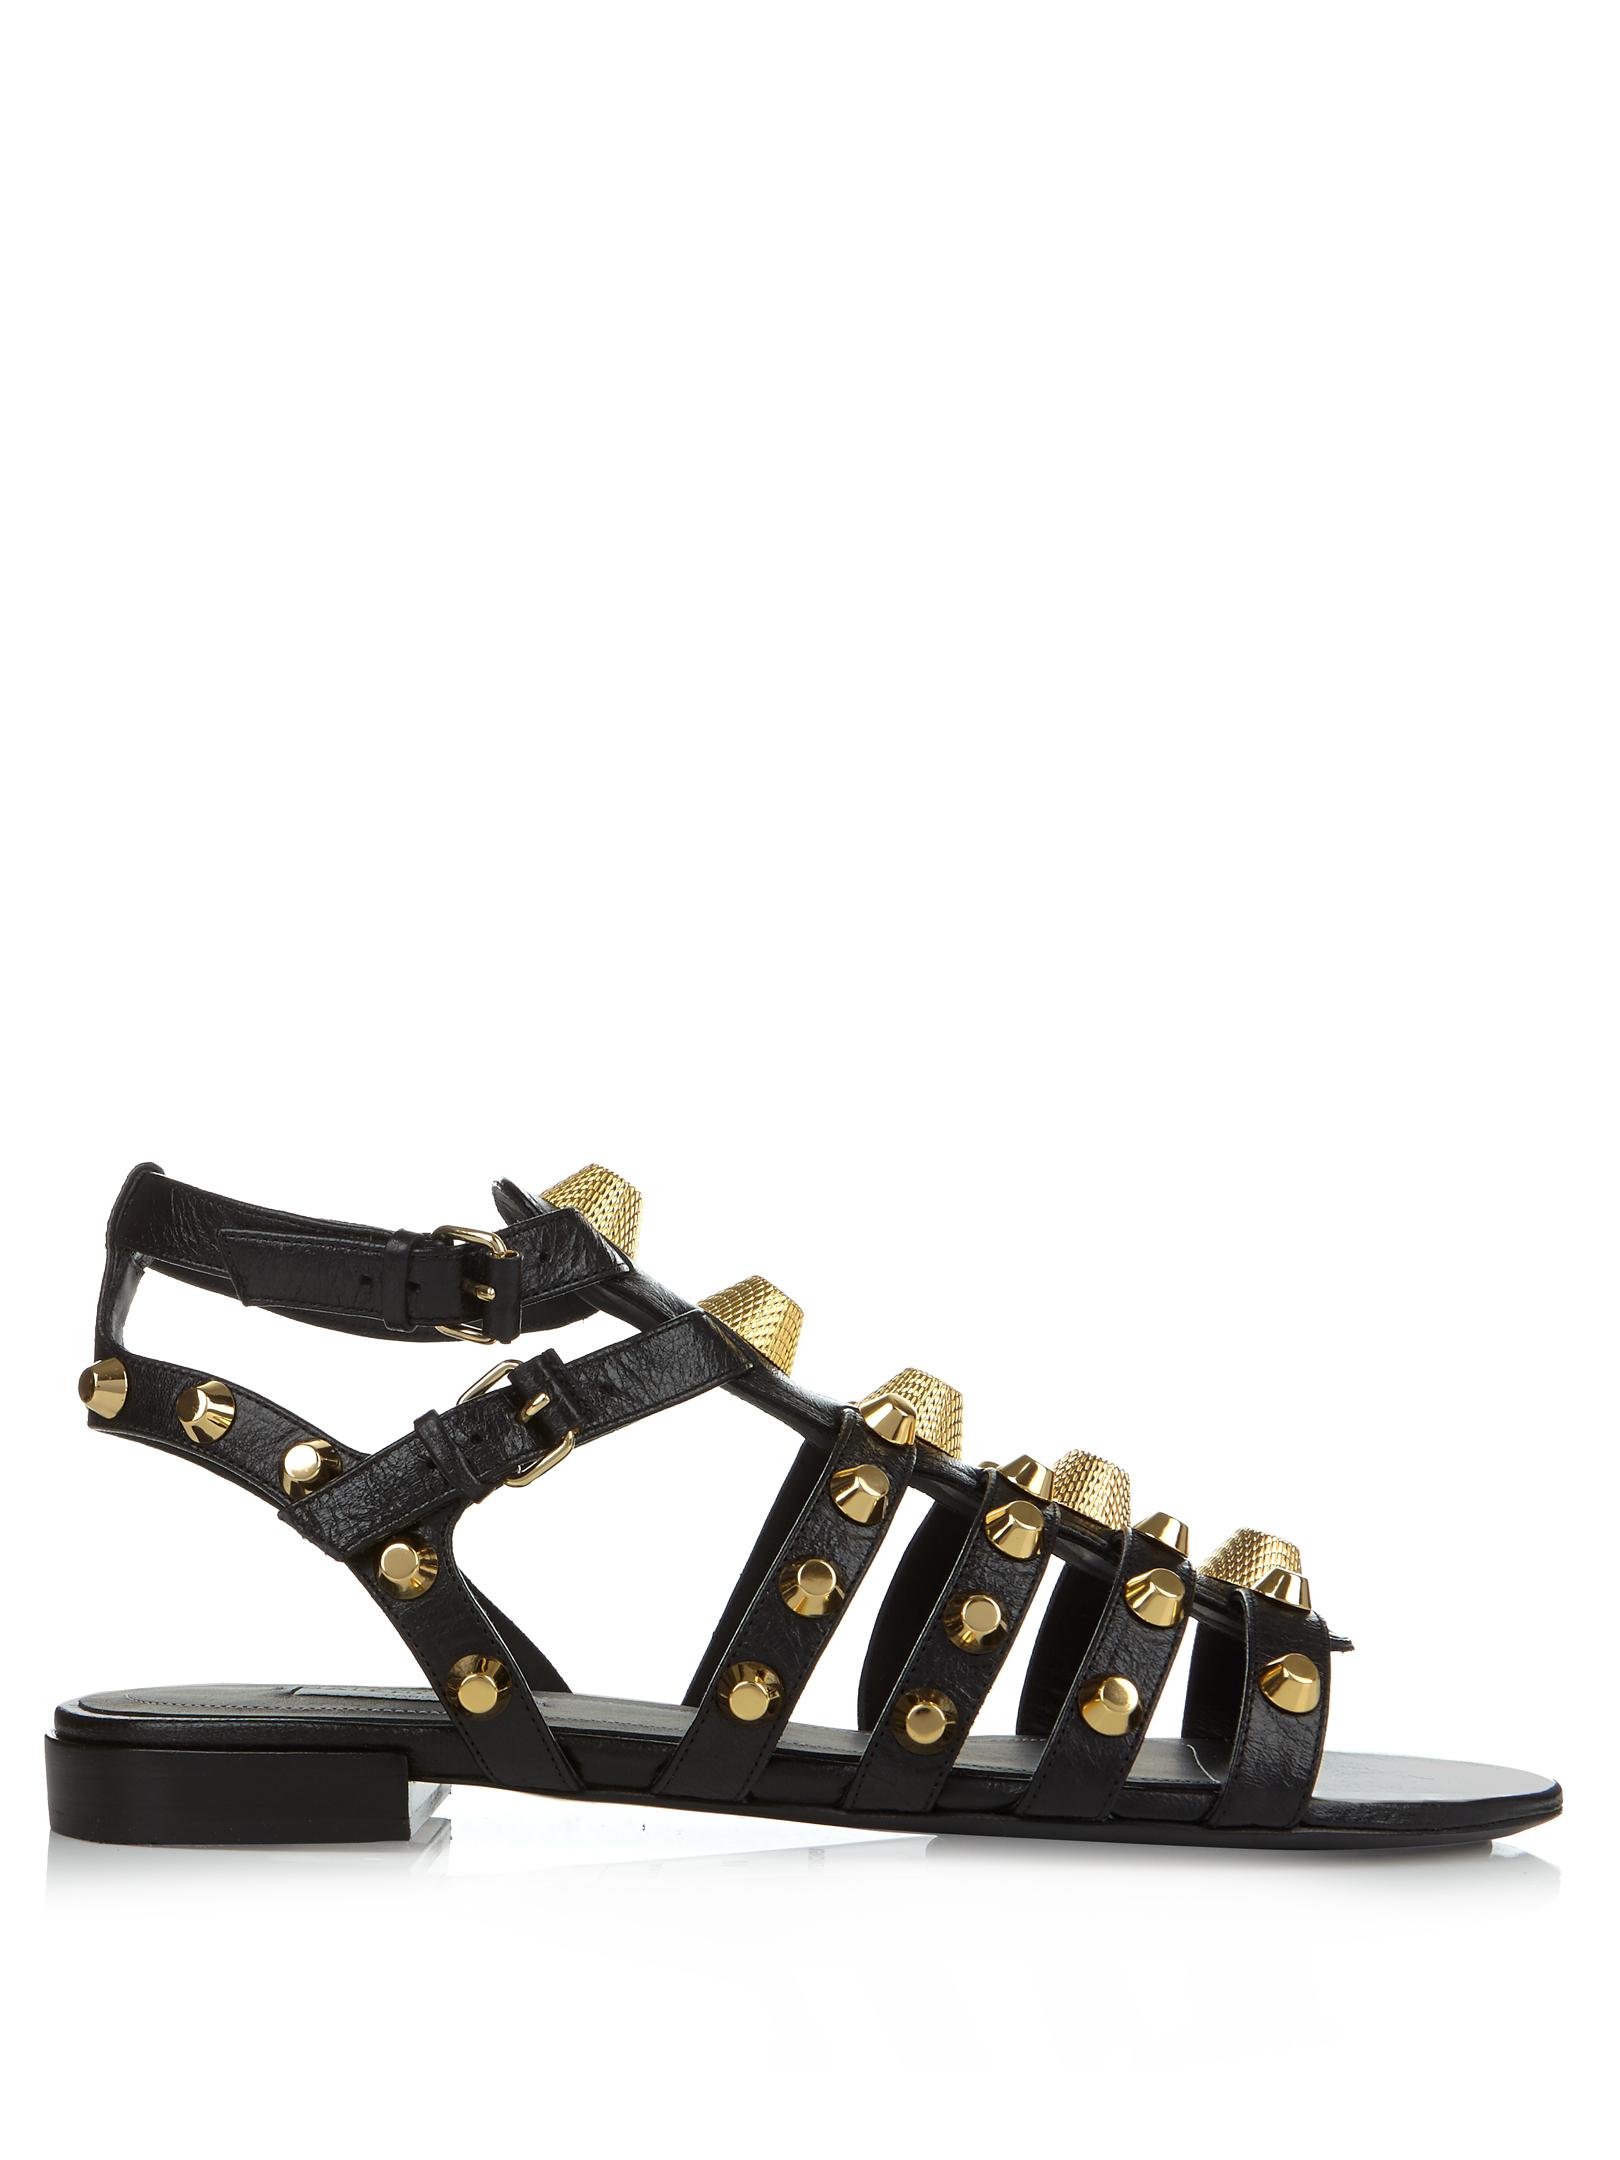 Balenciaga Giant Studded Leather Gladiator Sandals in Black |